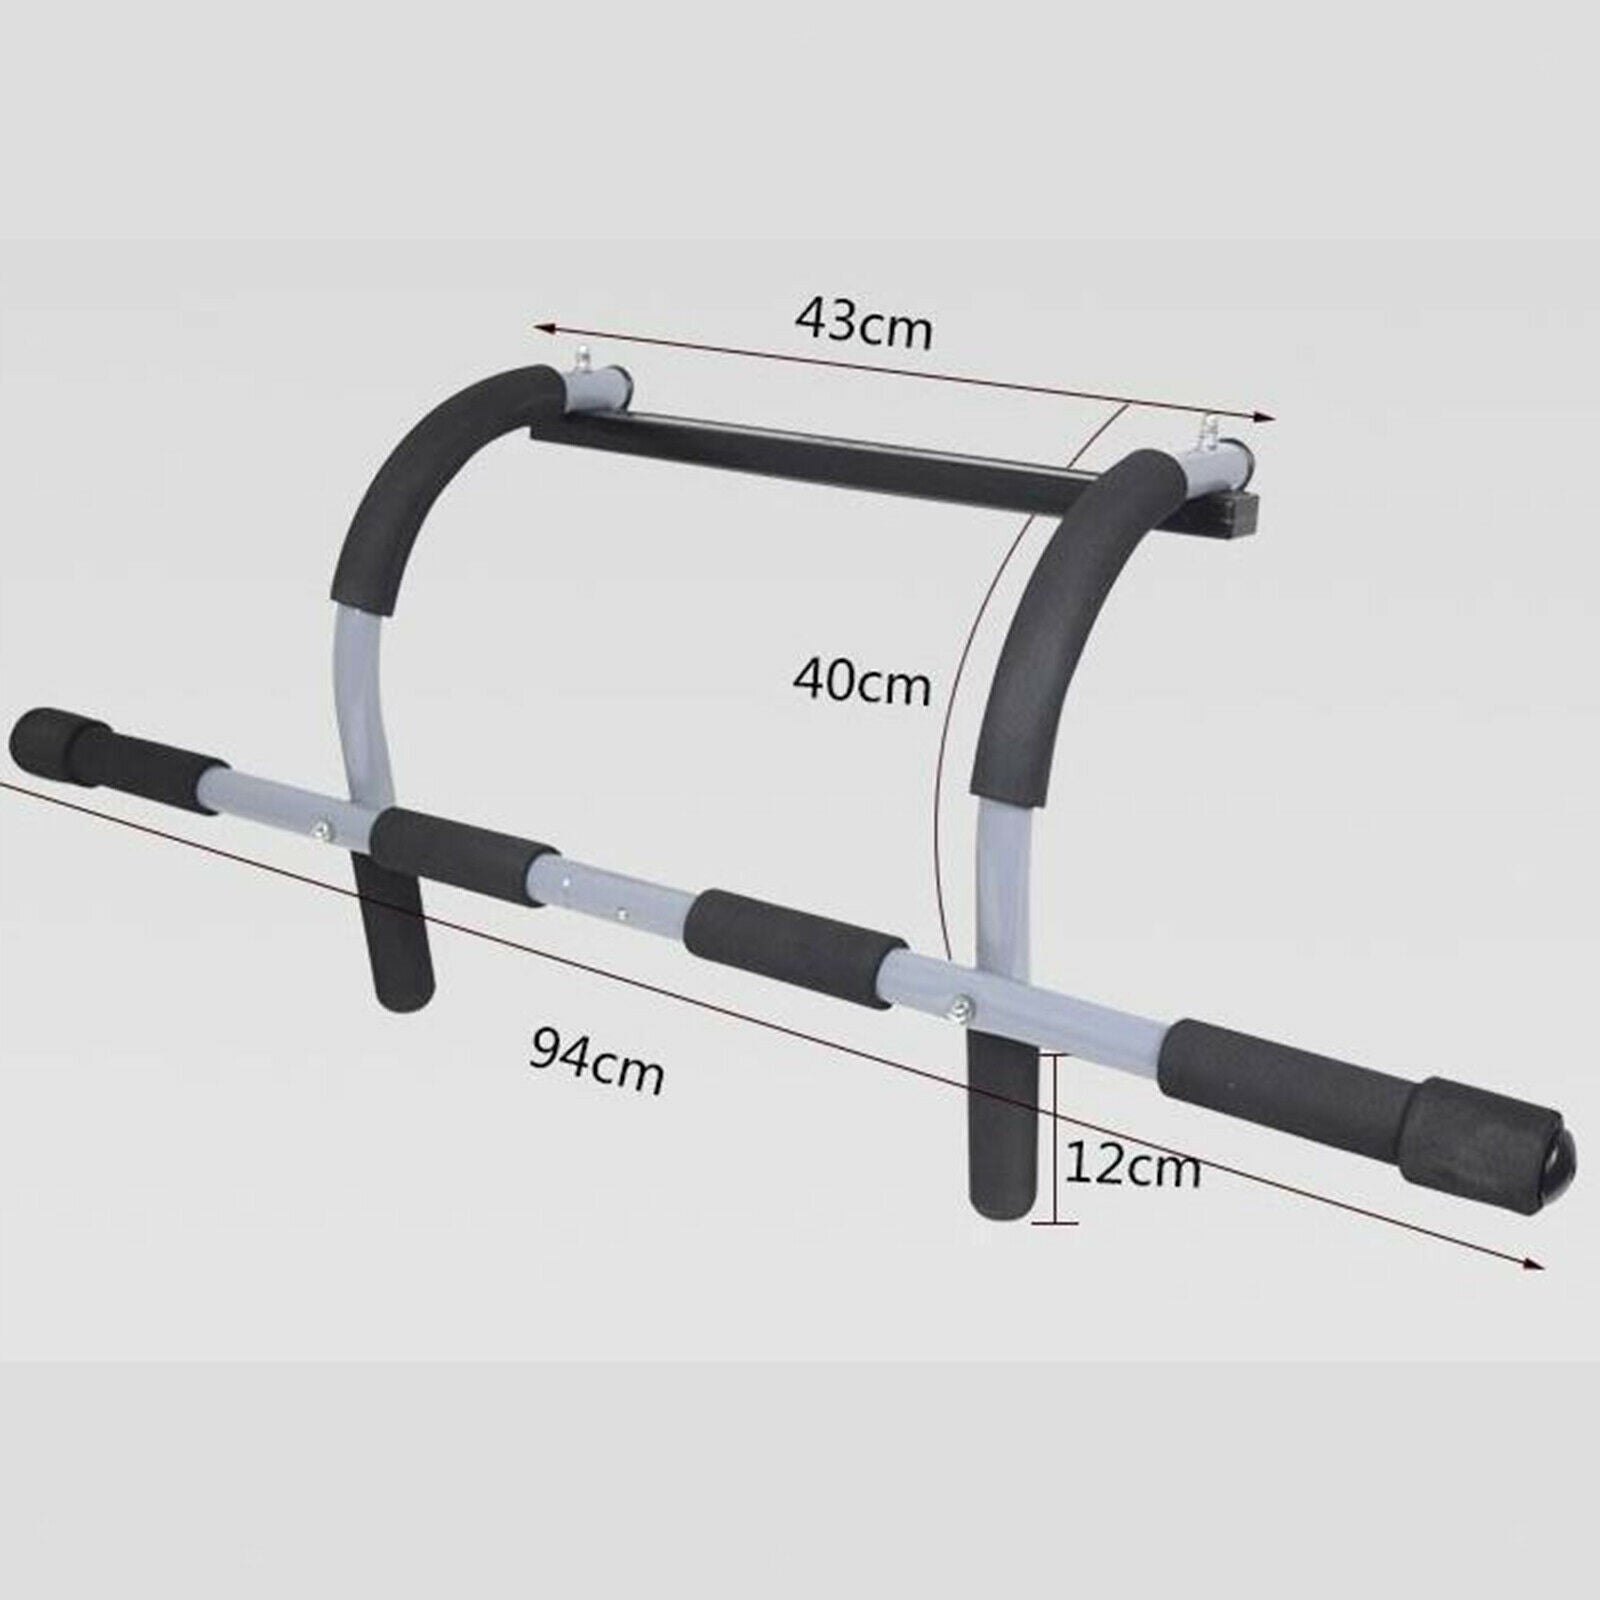 Doorway Pull-up Chin-Up Bar Upper Body Ab Home Gym Fitness Training Strength